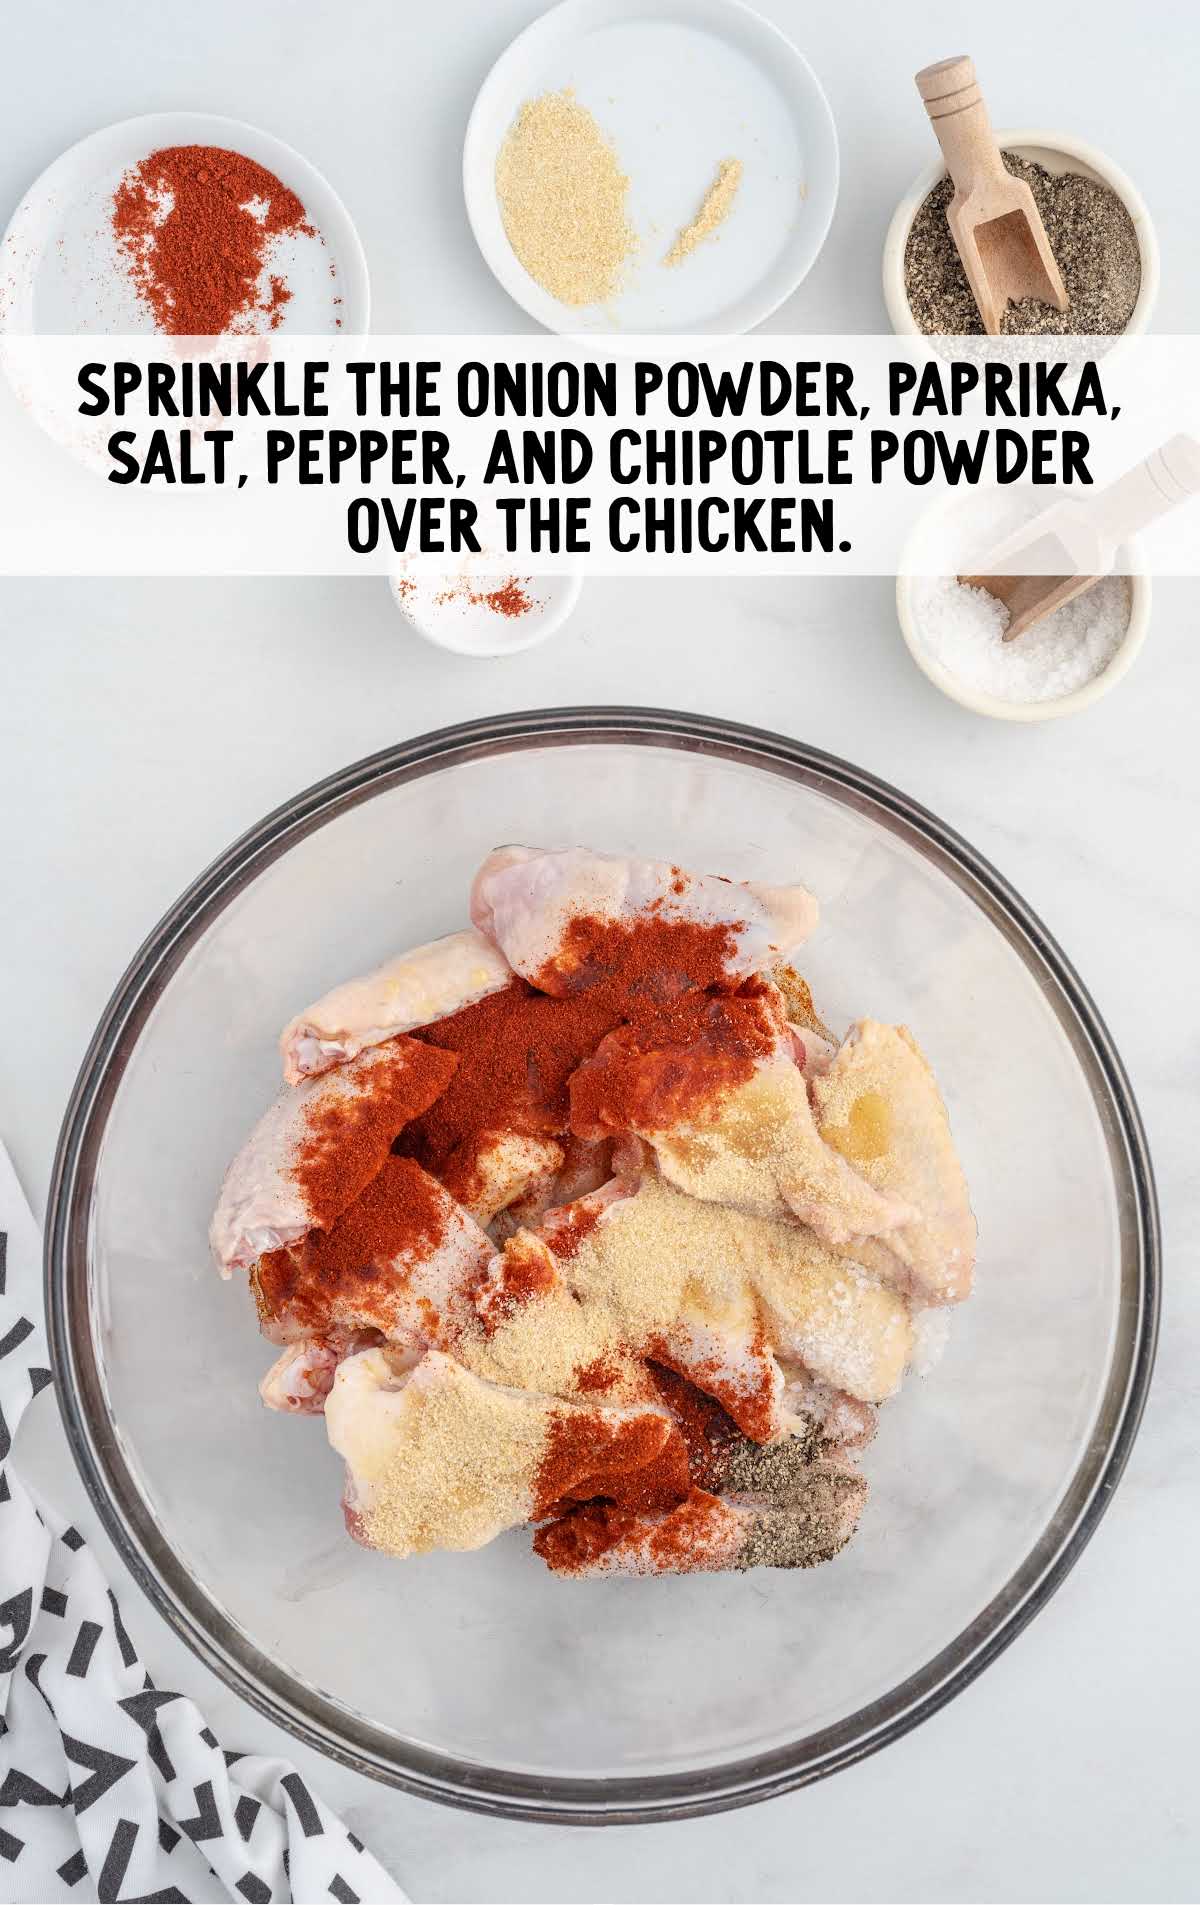 onion powder, paprika, salt, pepper, and chipotle powder sprinkled over the chicken in a bowl